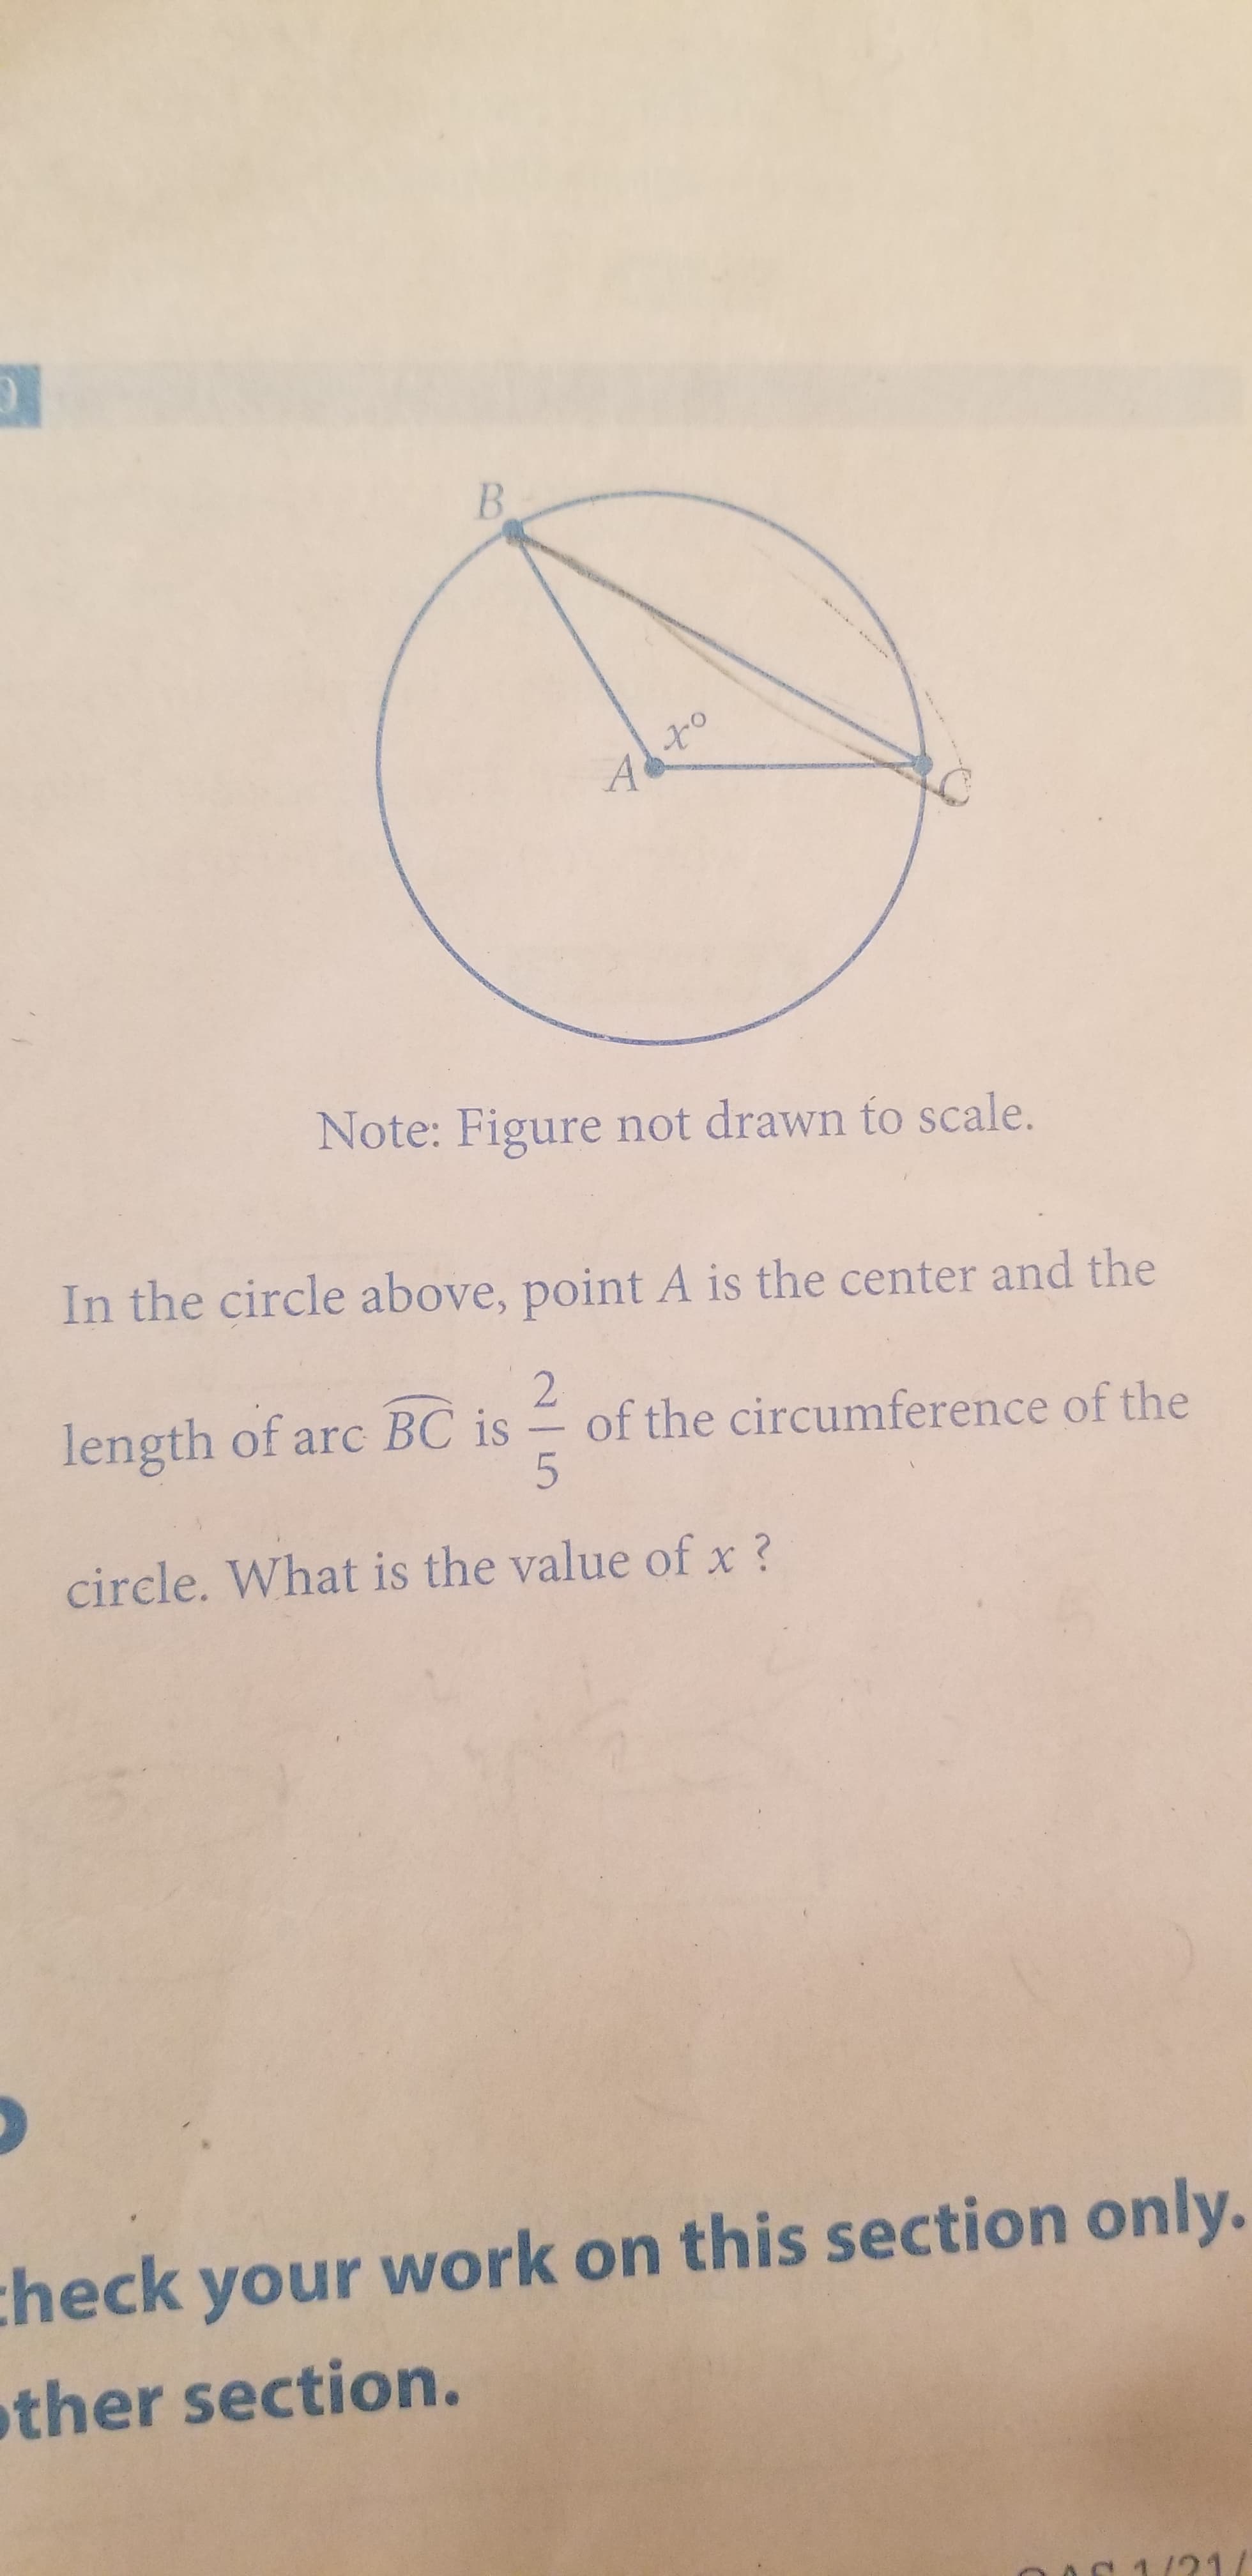 A
Note: Figure not drawn to scale.
In the circle above, point A is the center and the
2
of the circumference of the
5
length of arc BC is
circle. What is the value ofx?
:heck your work on this section only.
ther section.
21
